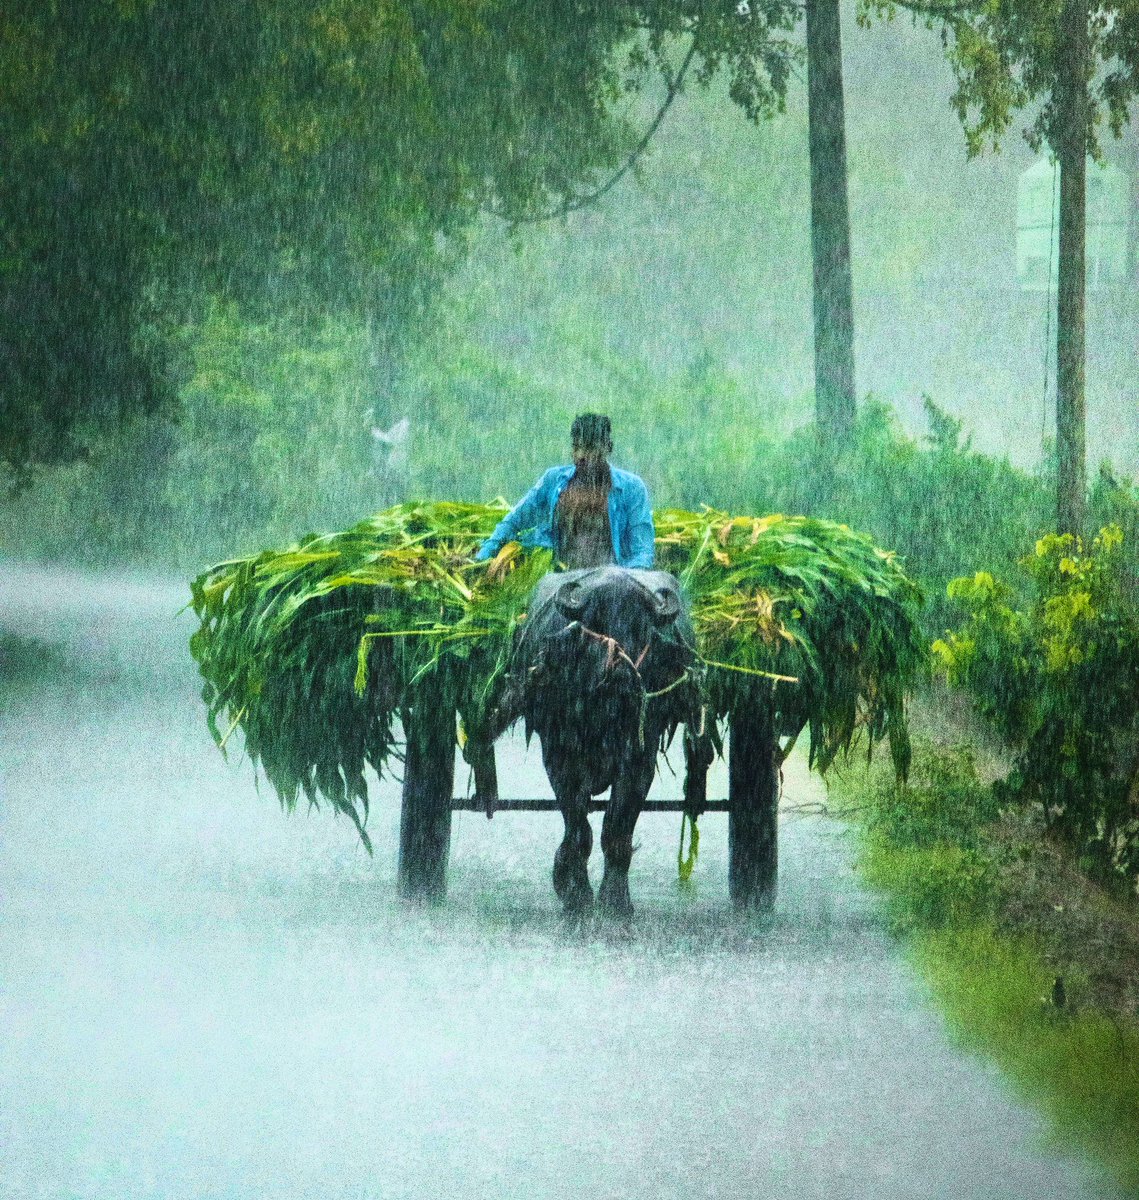 Monsoon has arrived ⛈ and took this breathtaking shot of a farmer with his bull cart in the rain. #capturedoncanon @Canon_India @NatureIn_Focus @NatGeoPhotos @NatGeoTravel @Discovery